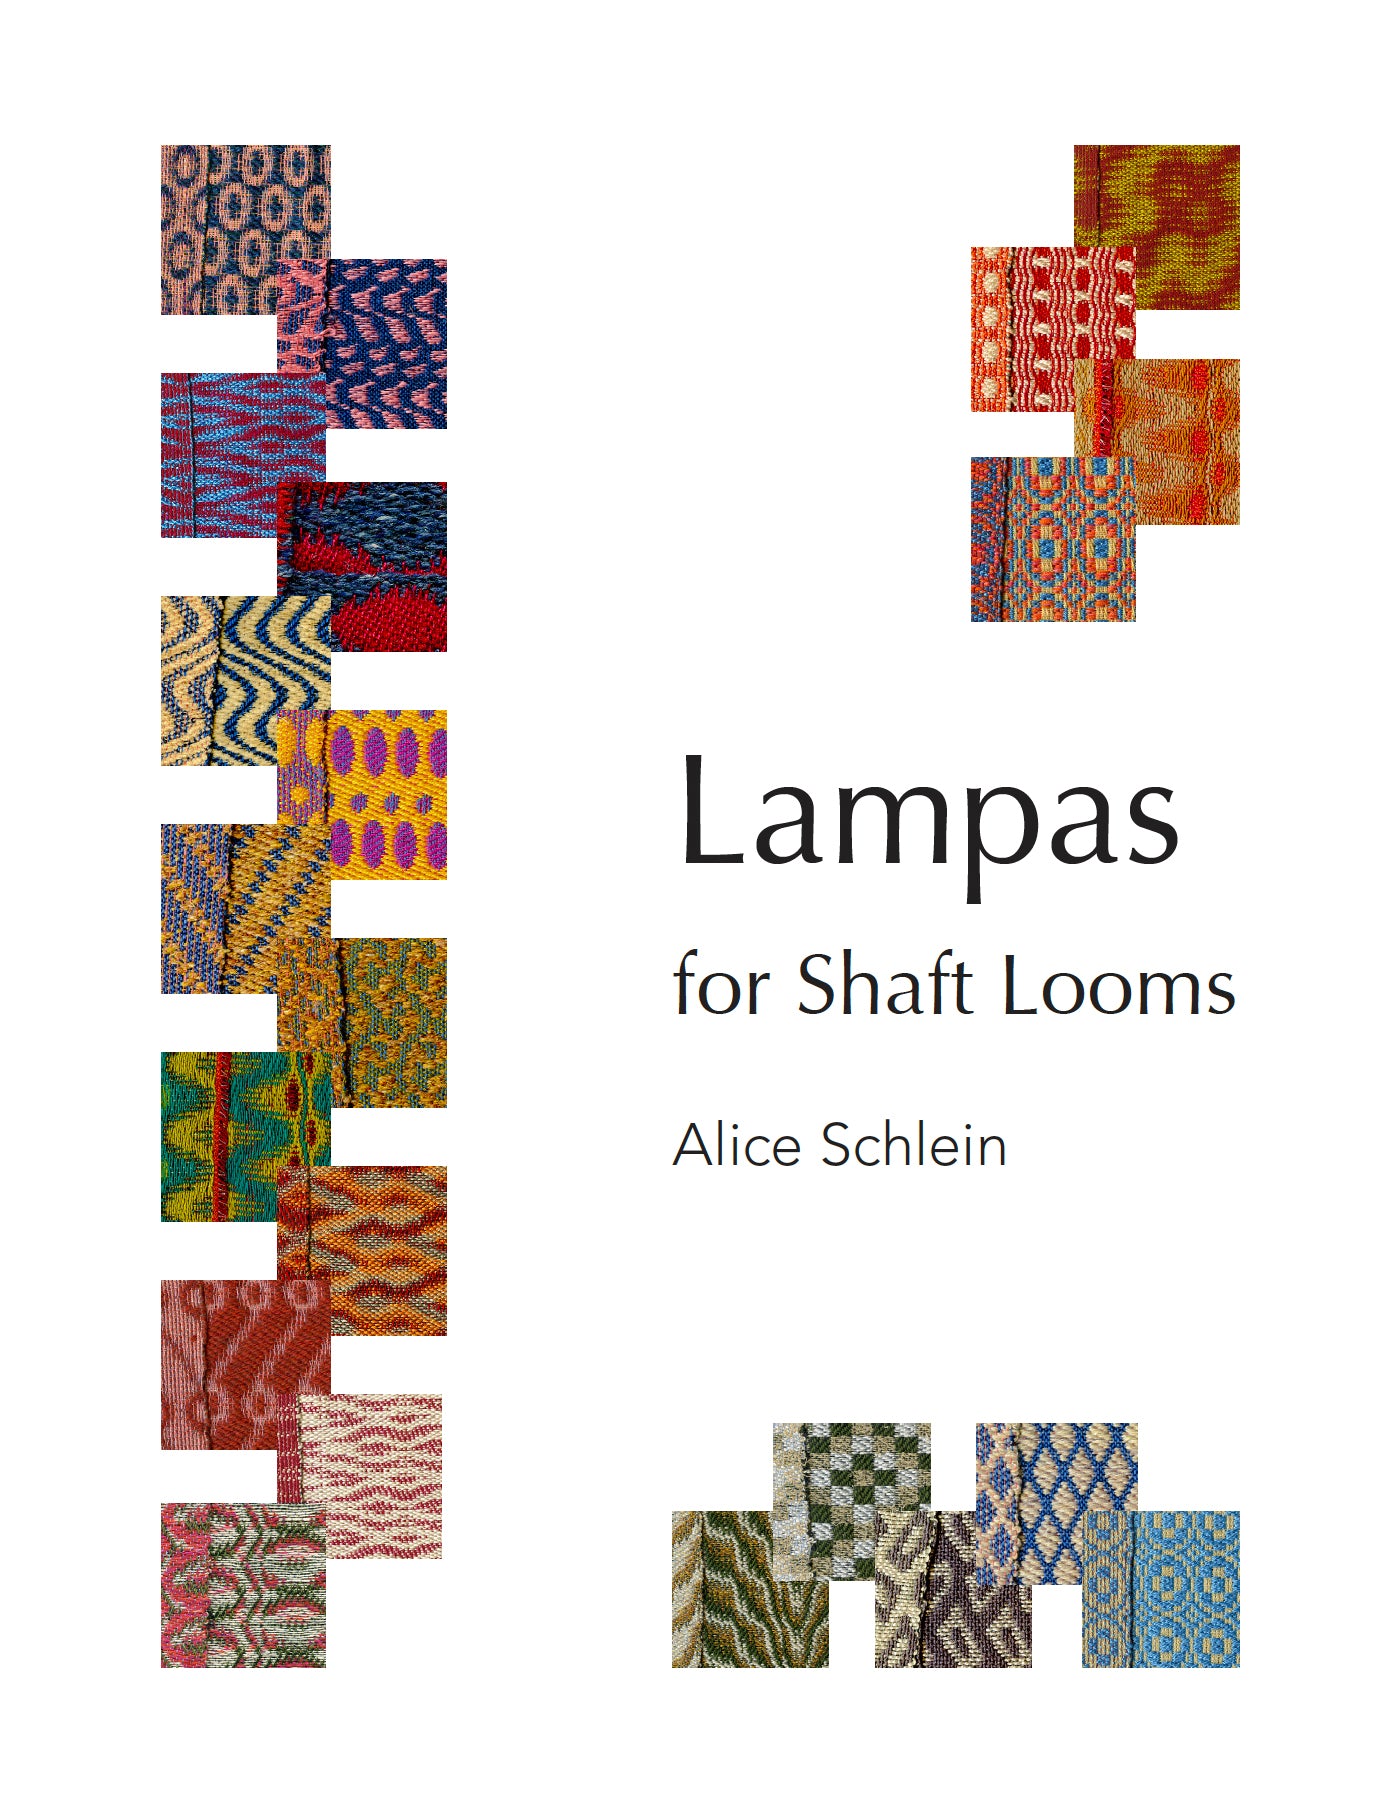 Lampas for Shaft Looms by Alice Schlein